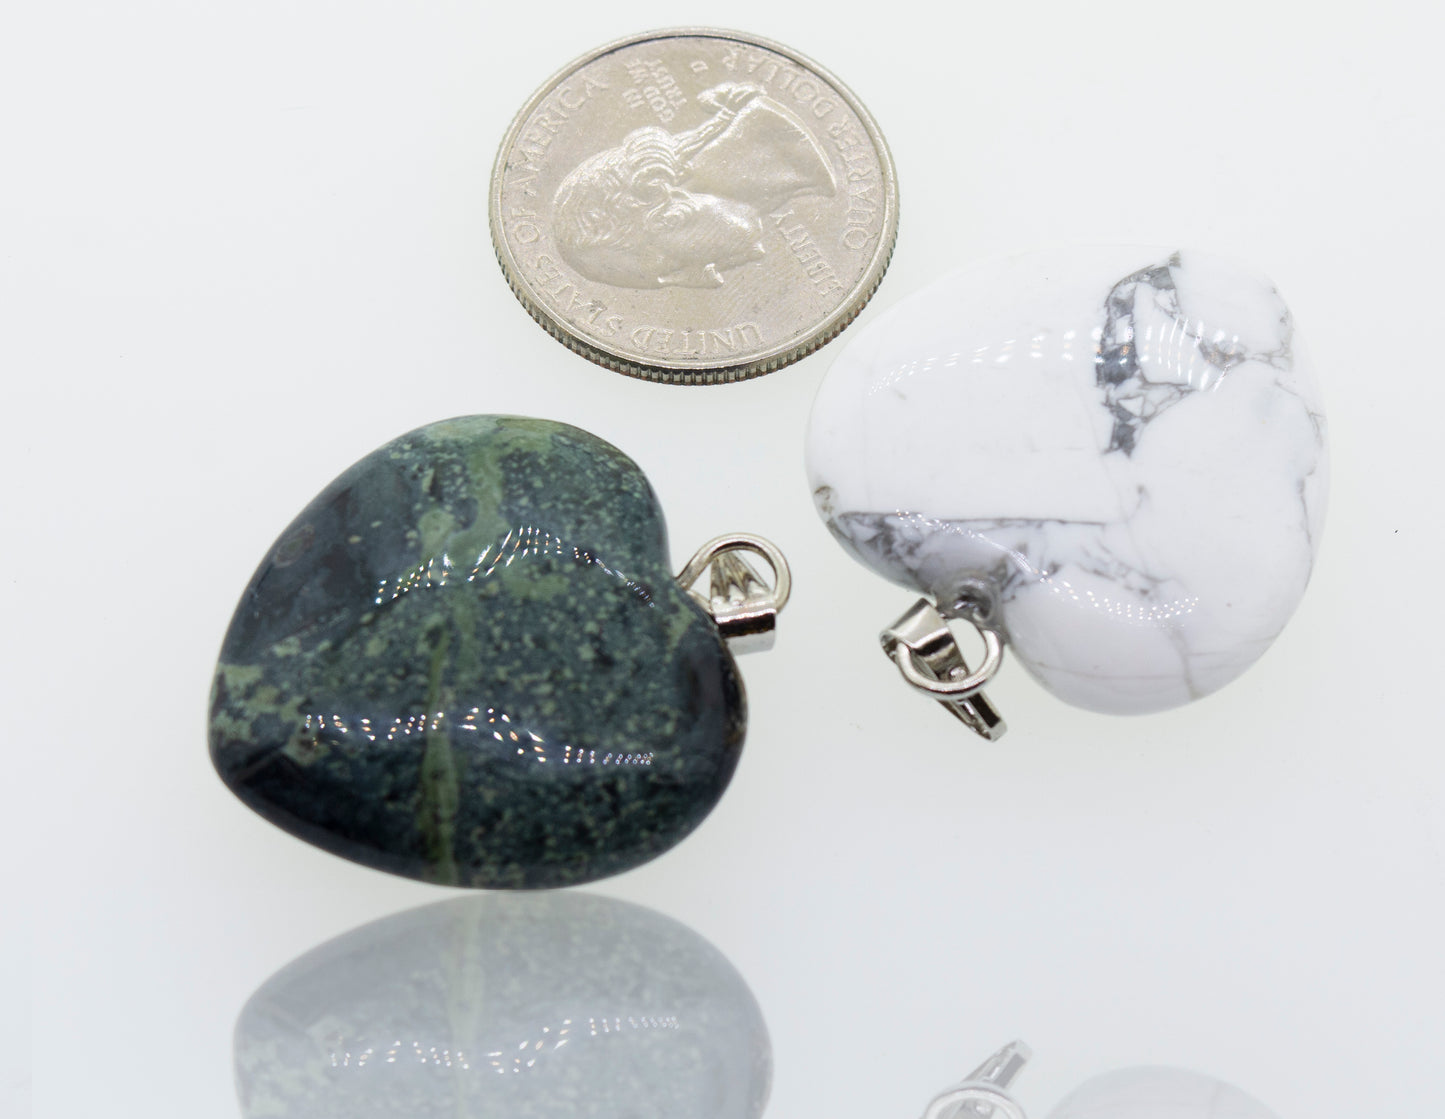 Two Super Silver Heart Stone Pendants, one green and one white, alongside a dime.